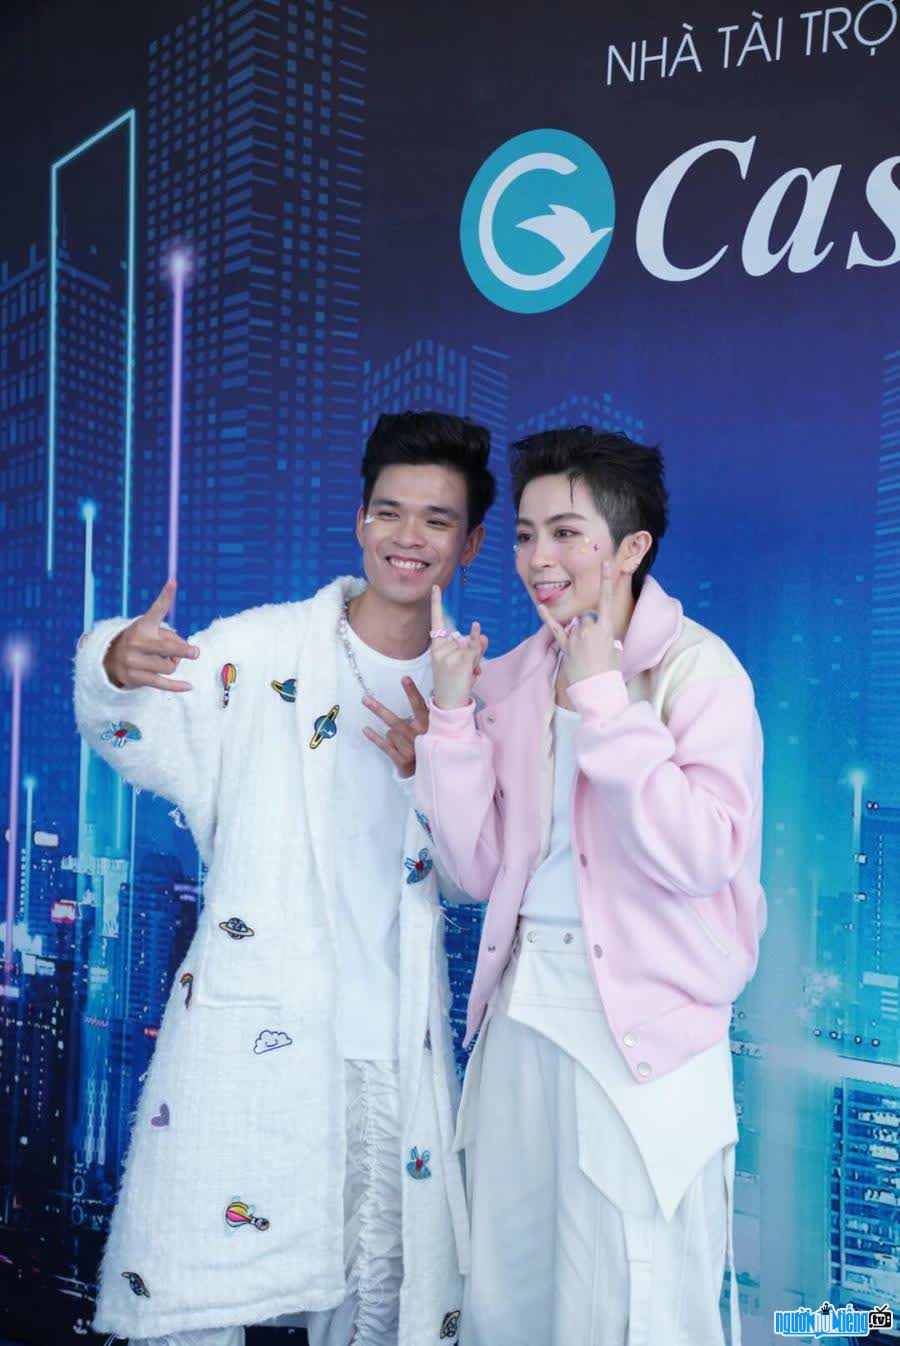 Picture of musician Minh Dinh and MC Gil Le